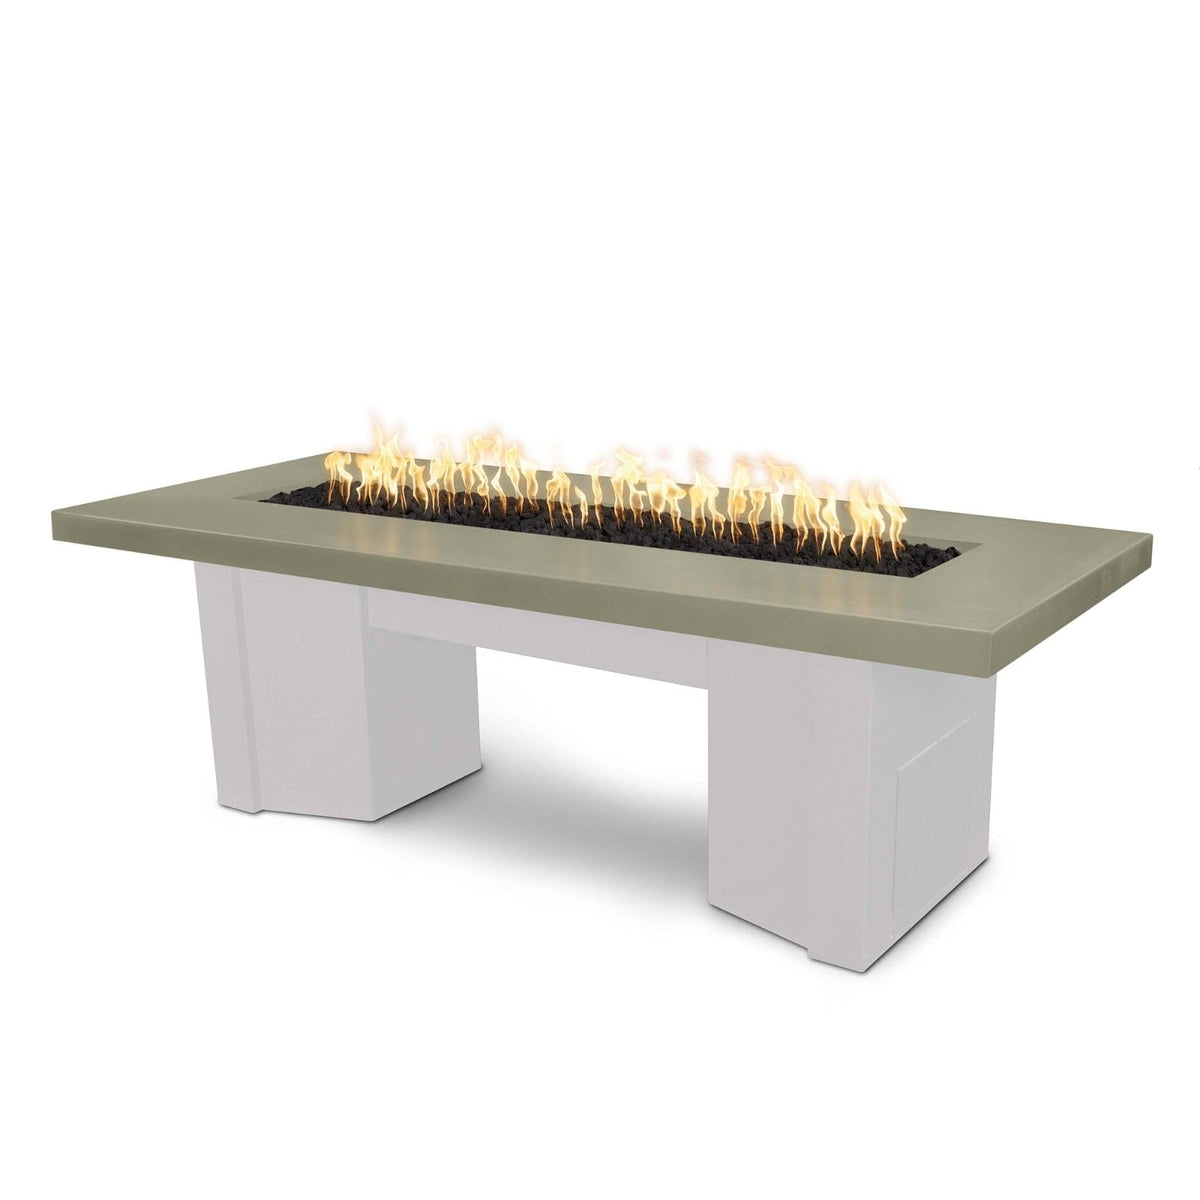 The Outdoor Plus Fire Features Ash (-ASH) / White Powder Coated Steel (-WHT) The Outdoor Plus 60&quot; Alameda Fire Table Smooth Concrete in Natural Gas - Flame Sense System with Push Button Spark Igniter / OPT-ALMGFRC60FSEN-NG